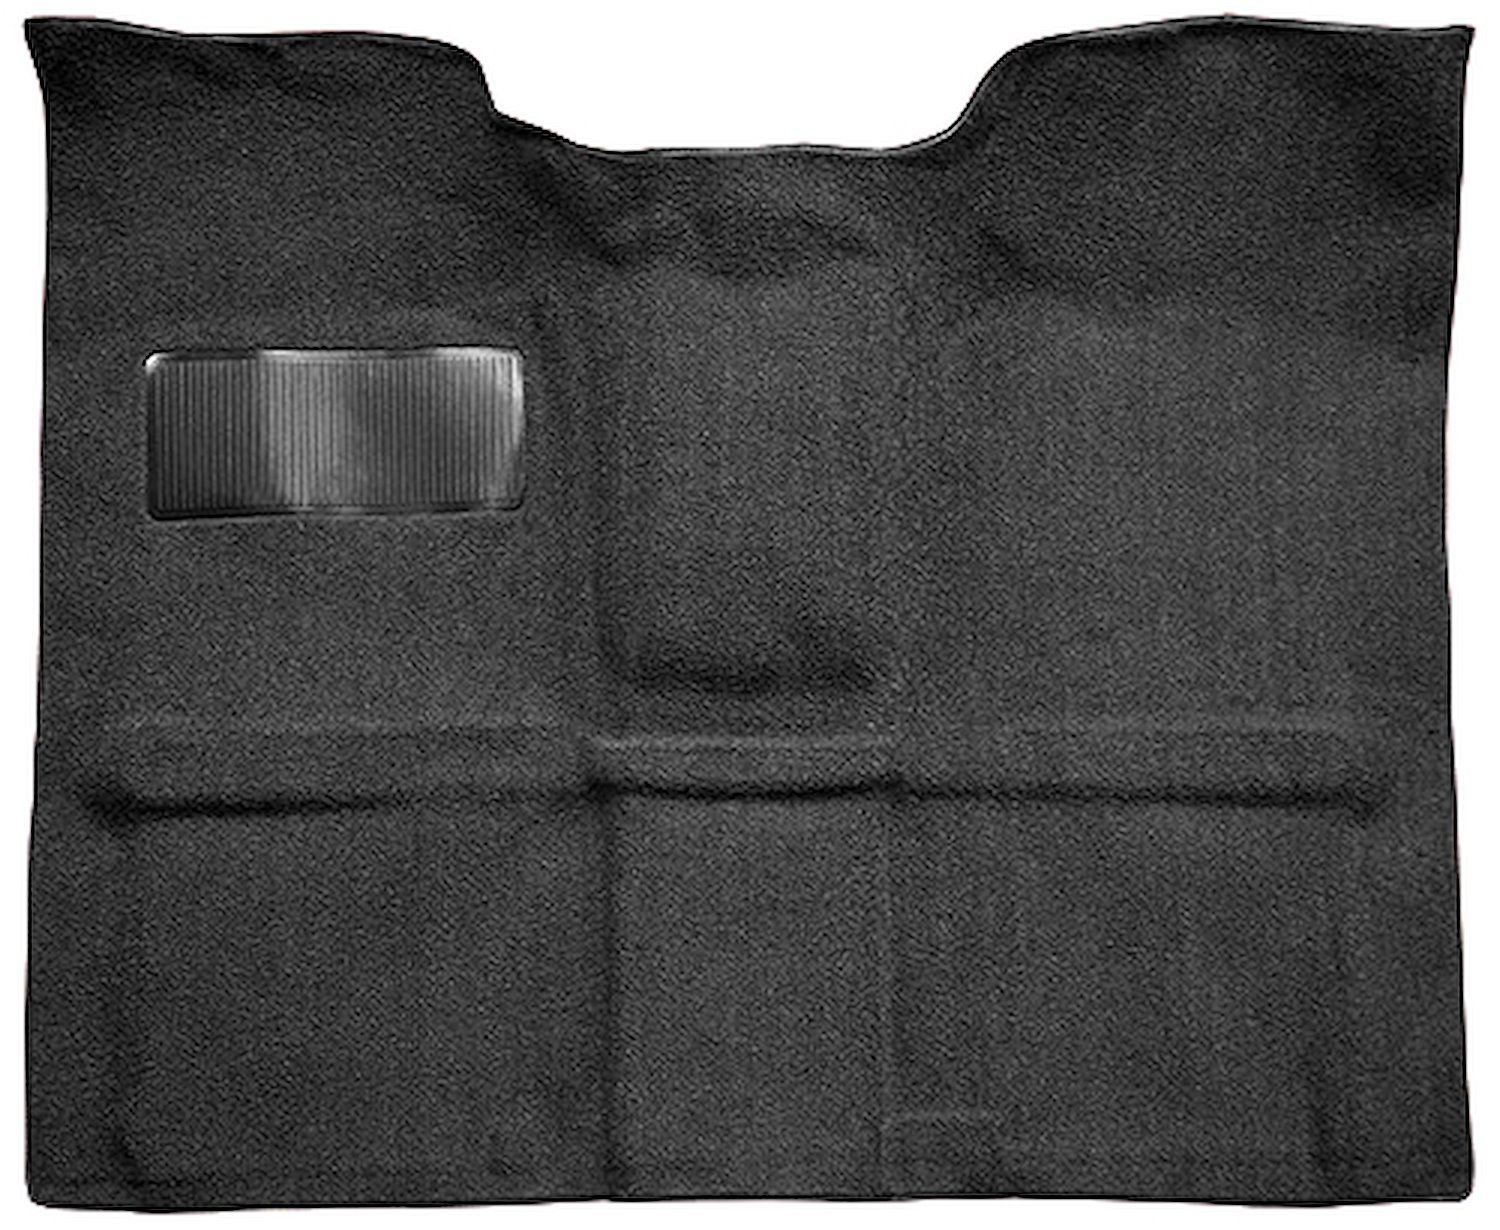 Molded Loop Carpet for 1967-1972 GM C Series Regular Cab Truck w/TH400 [OE-Style Jute Backing, Black]